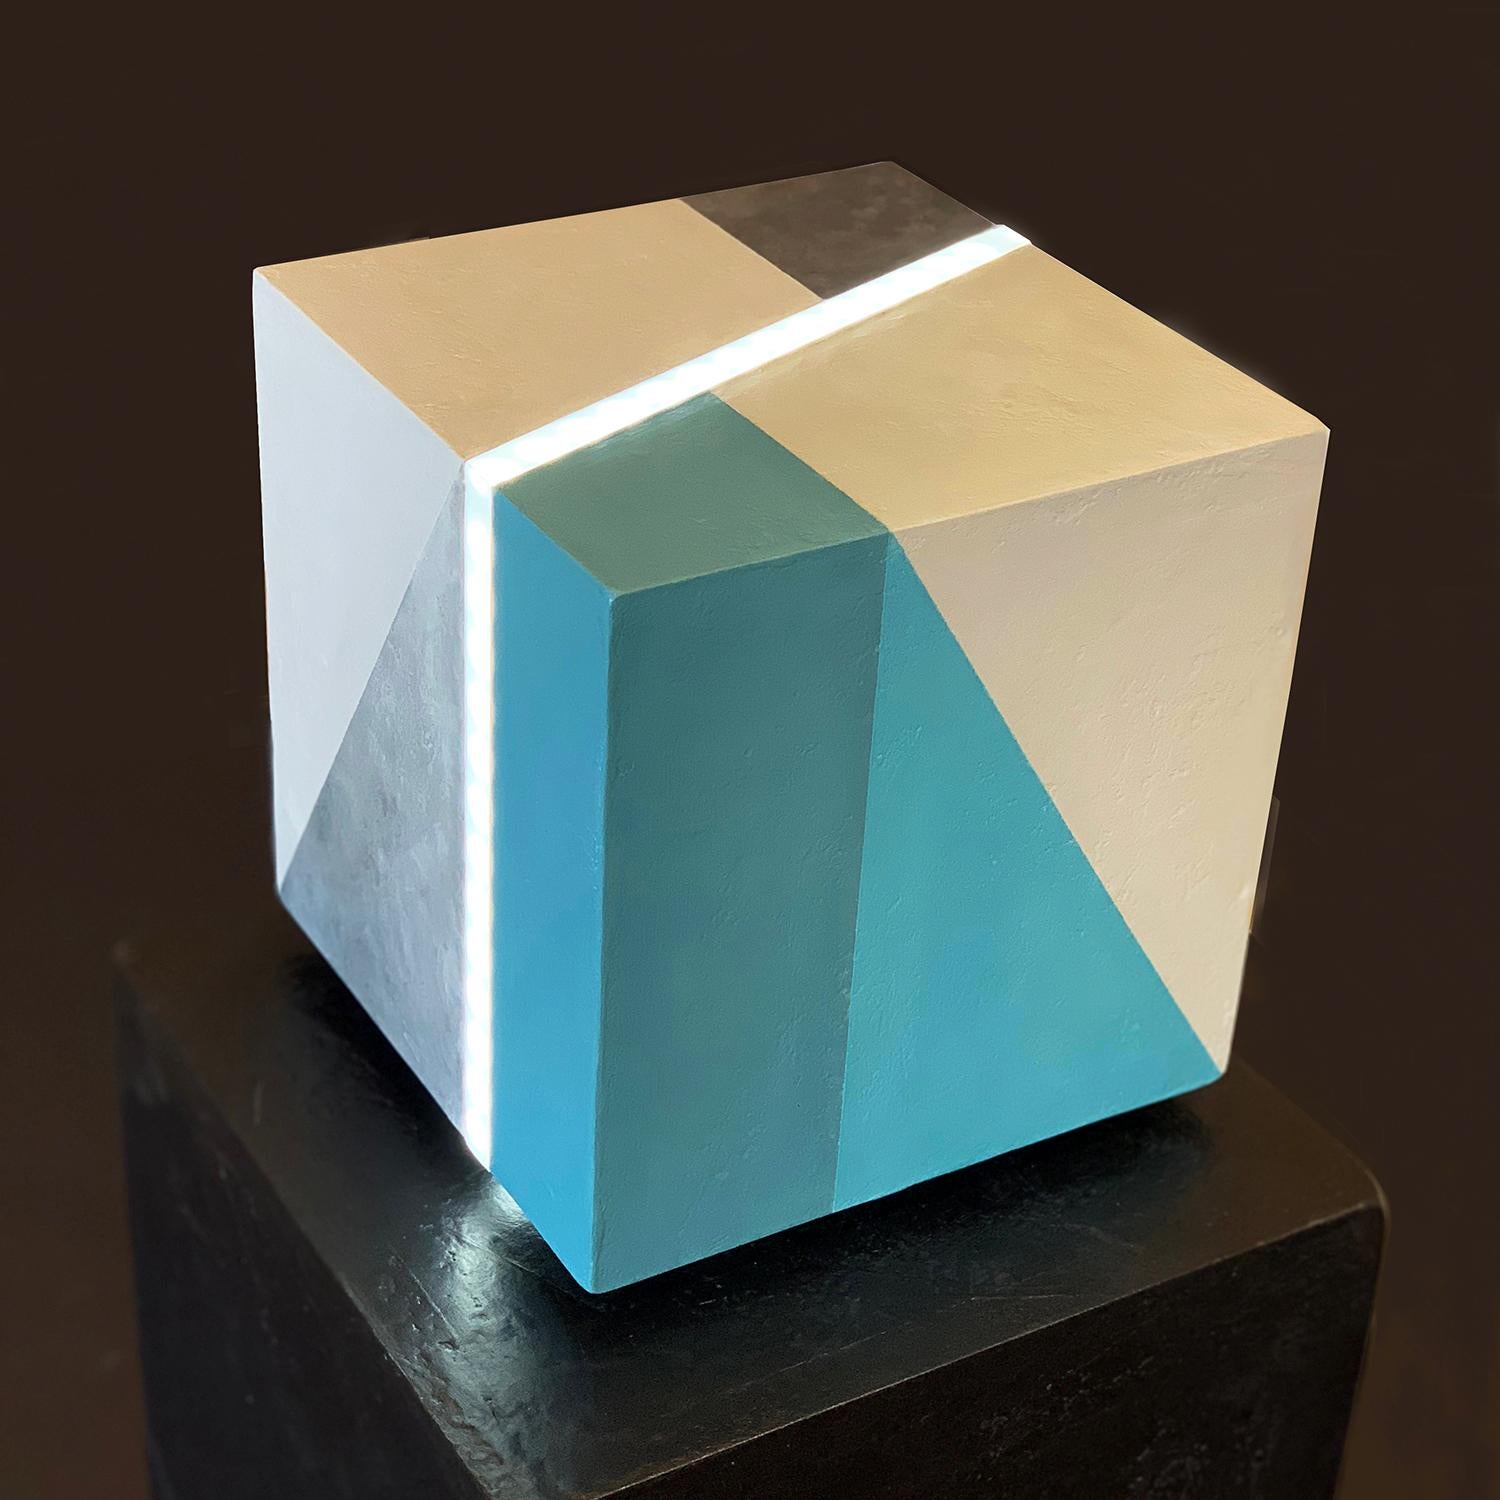 Cube Led Light . Mixed media on wood with LED light - Abstract Geometric Sculpture by Cari Cohen